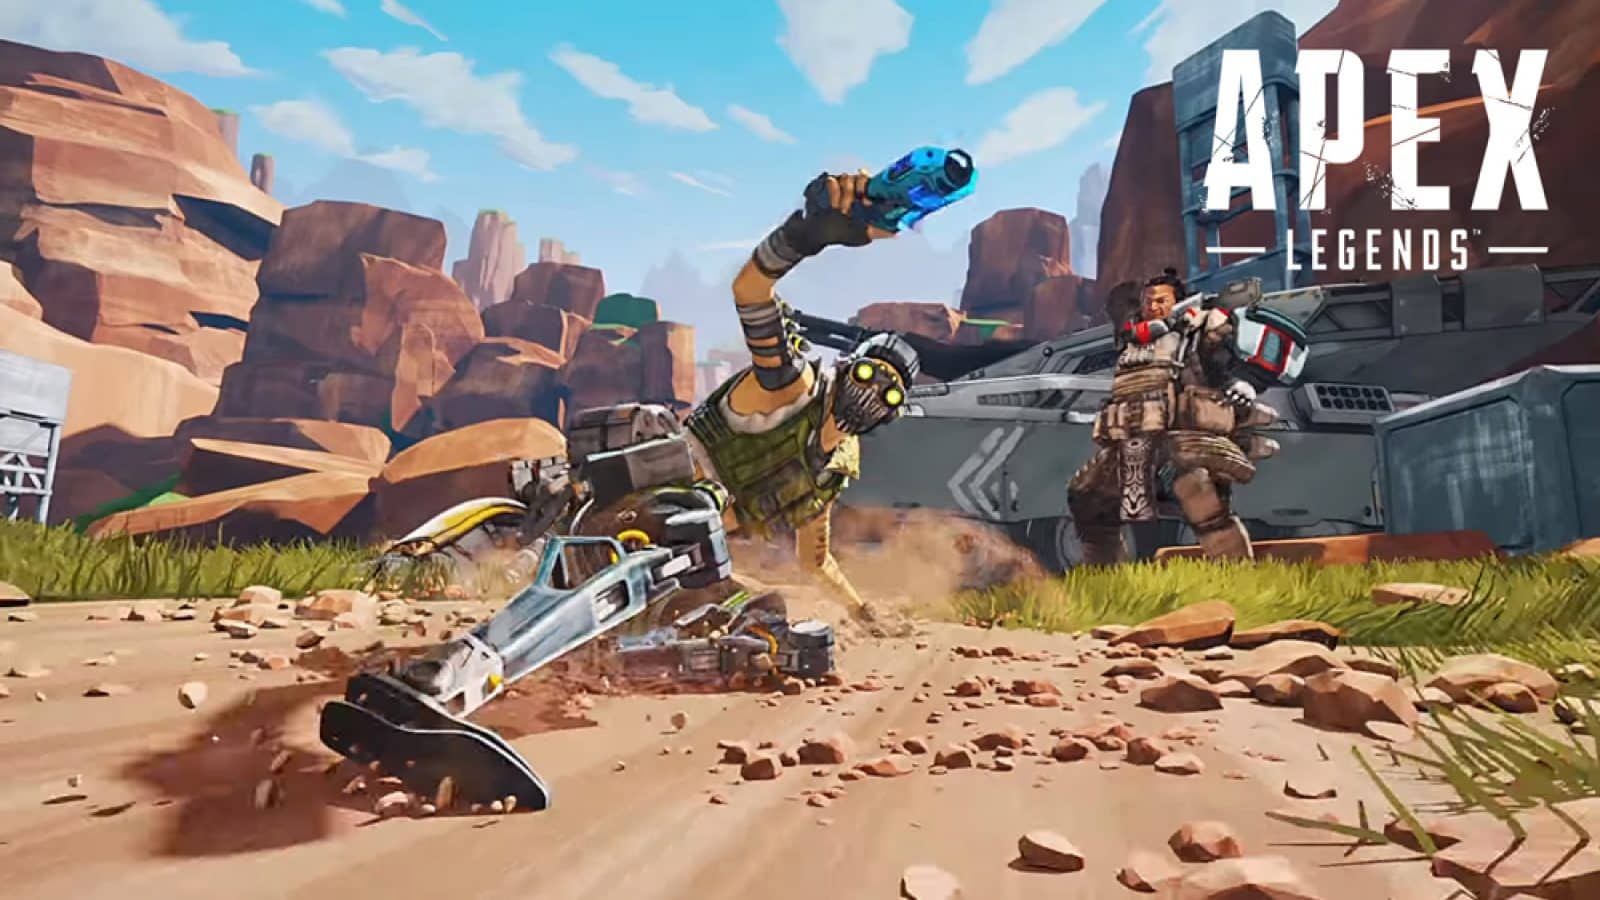 An apex legends character sliding down a moutain with weapon in hand